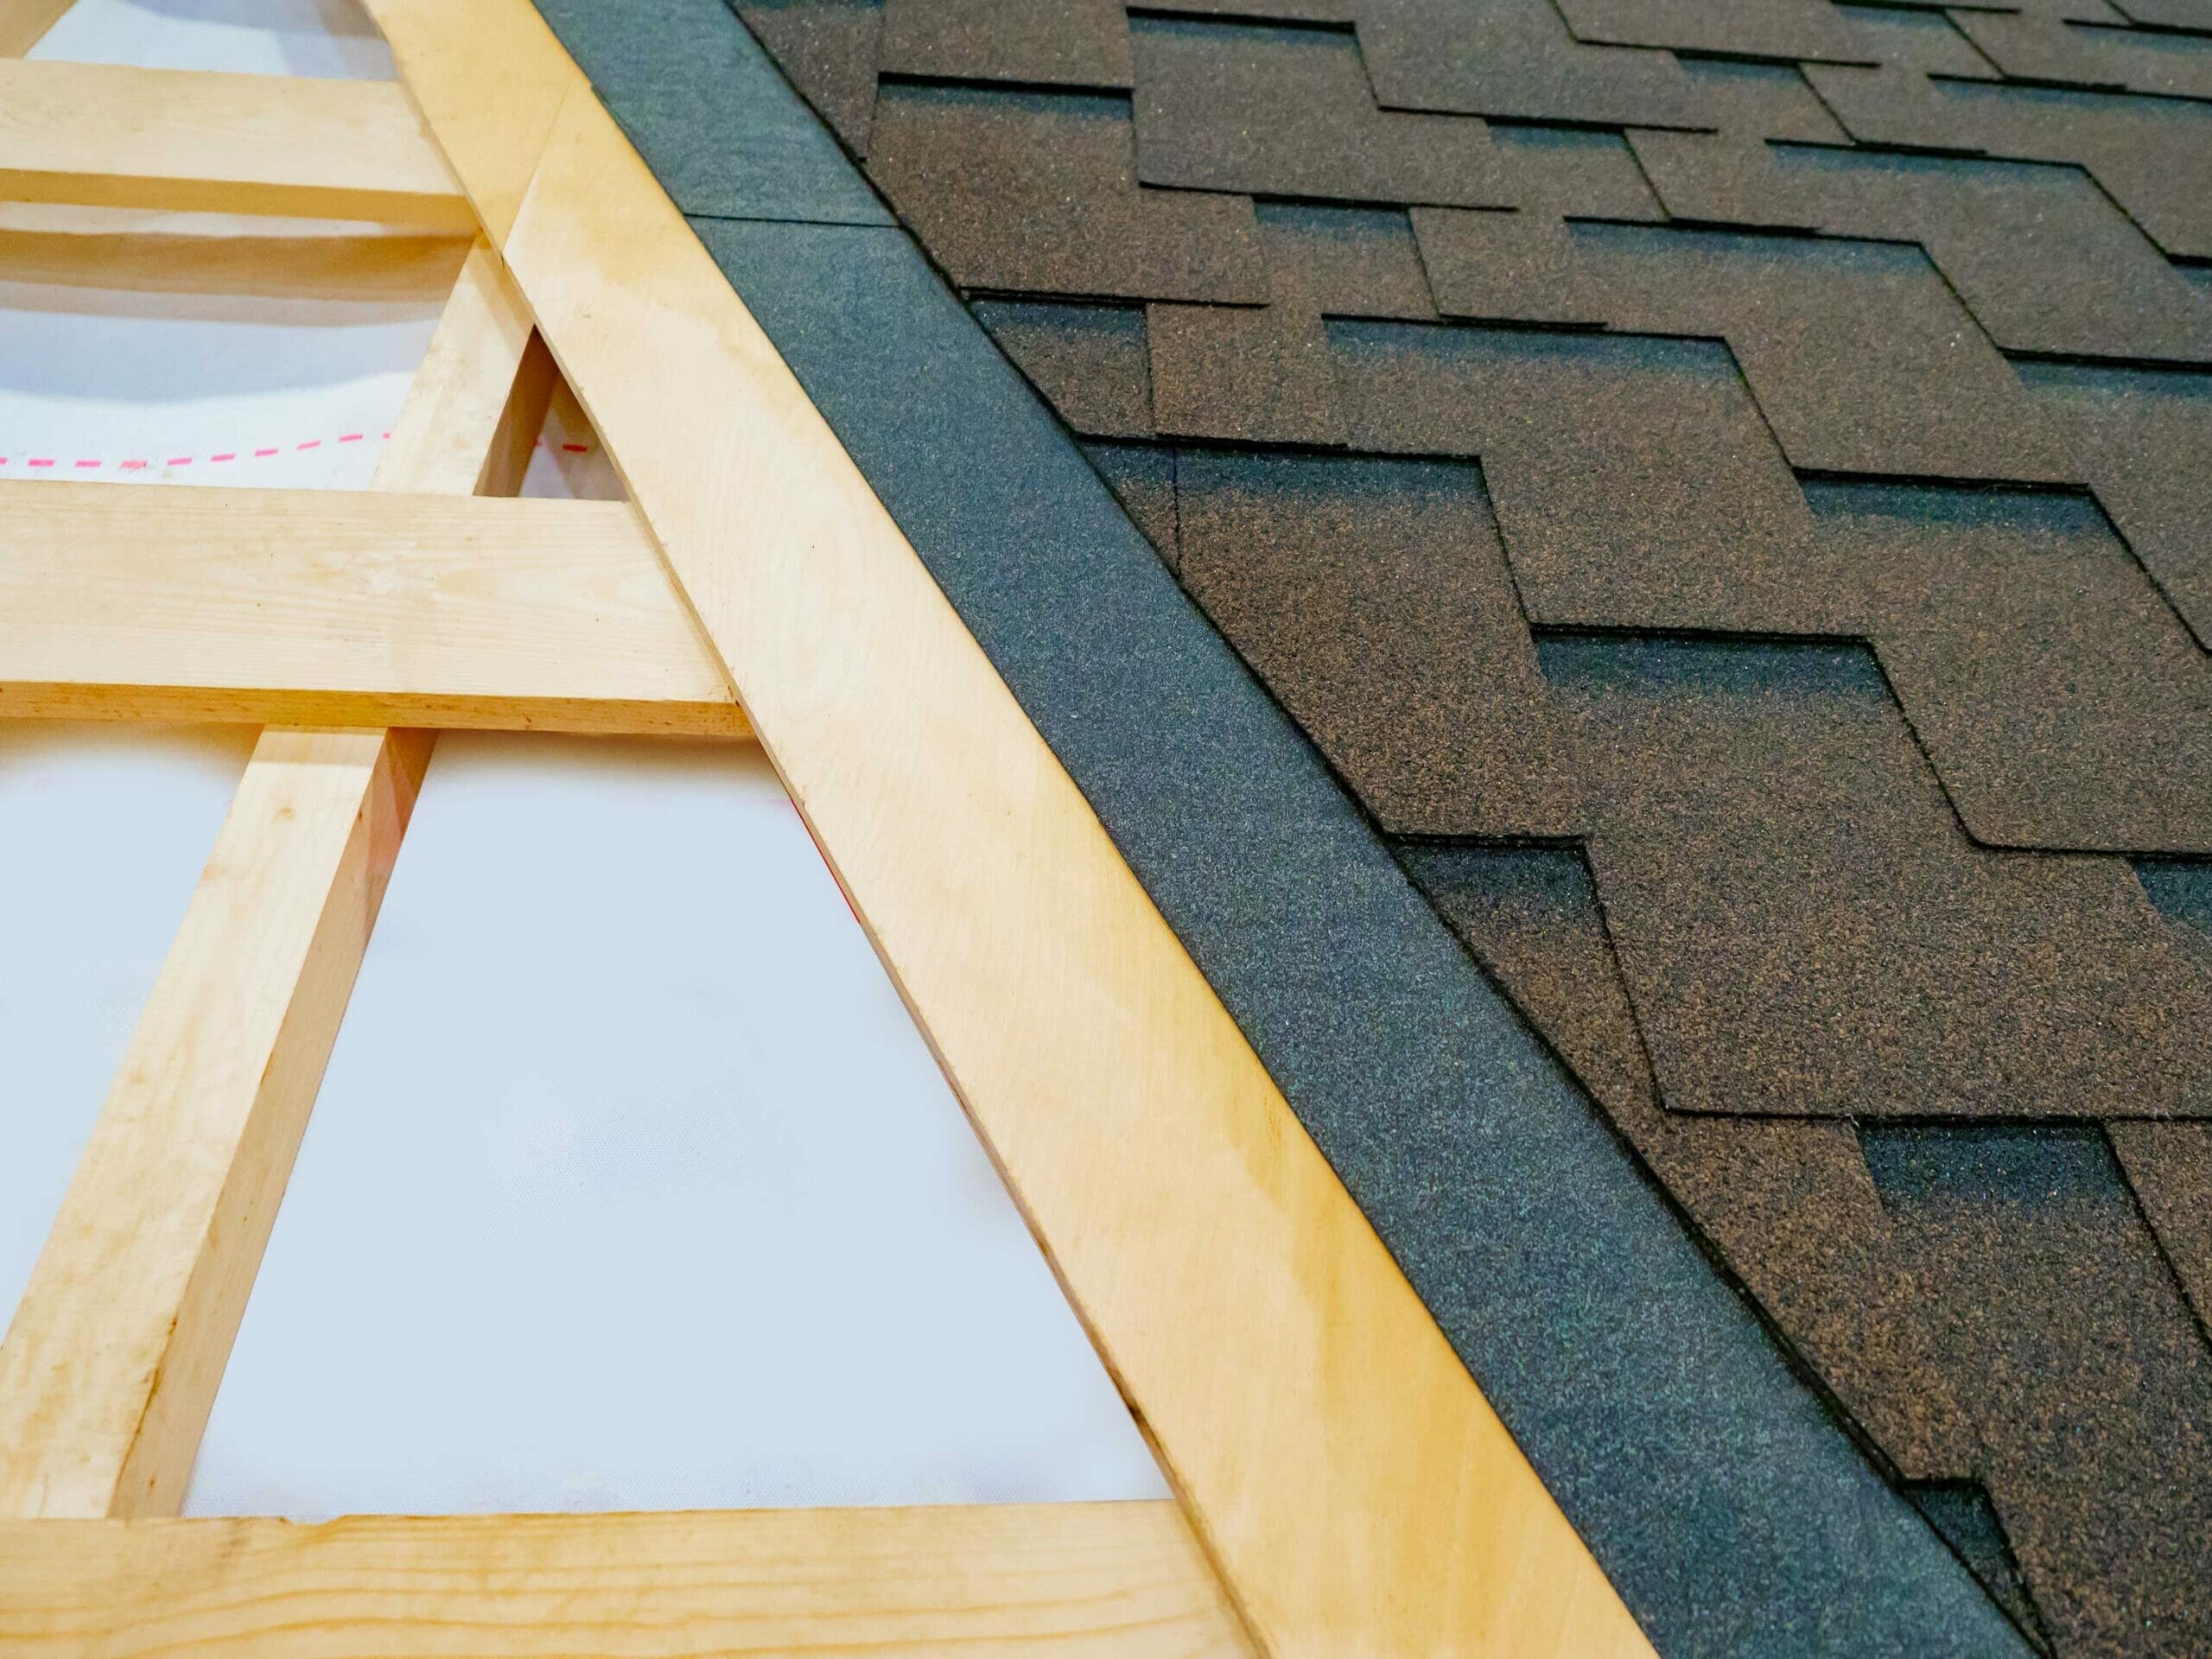 local roofing contractor in Tampa